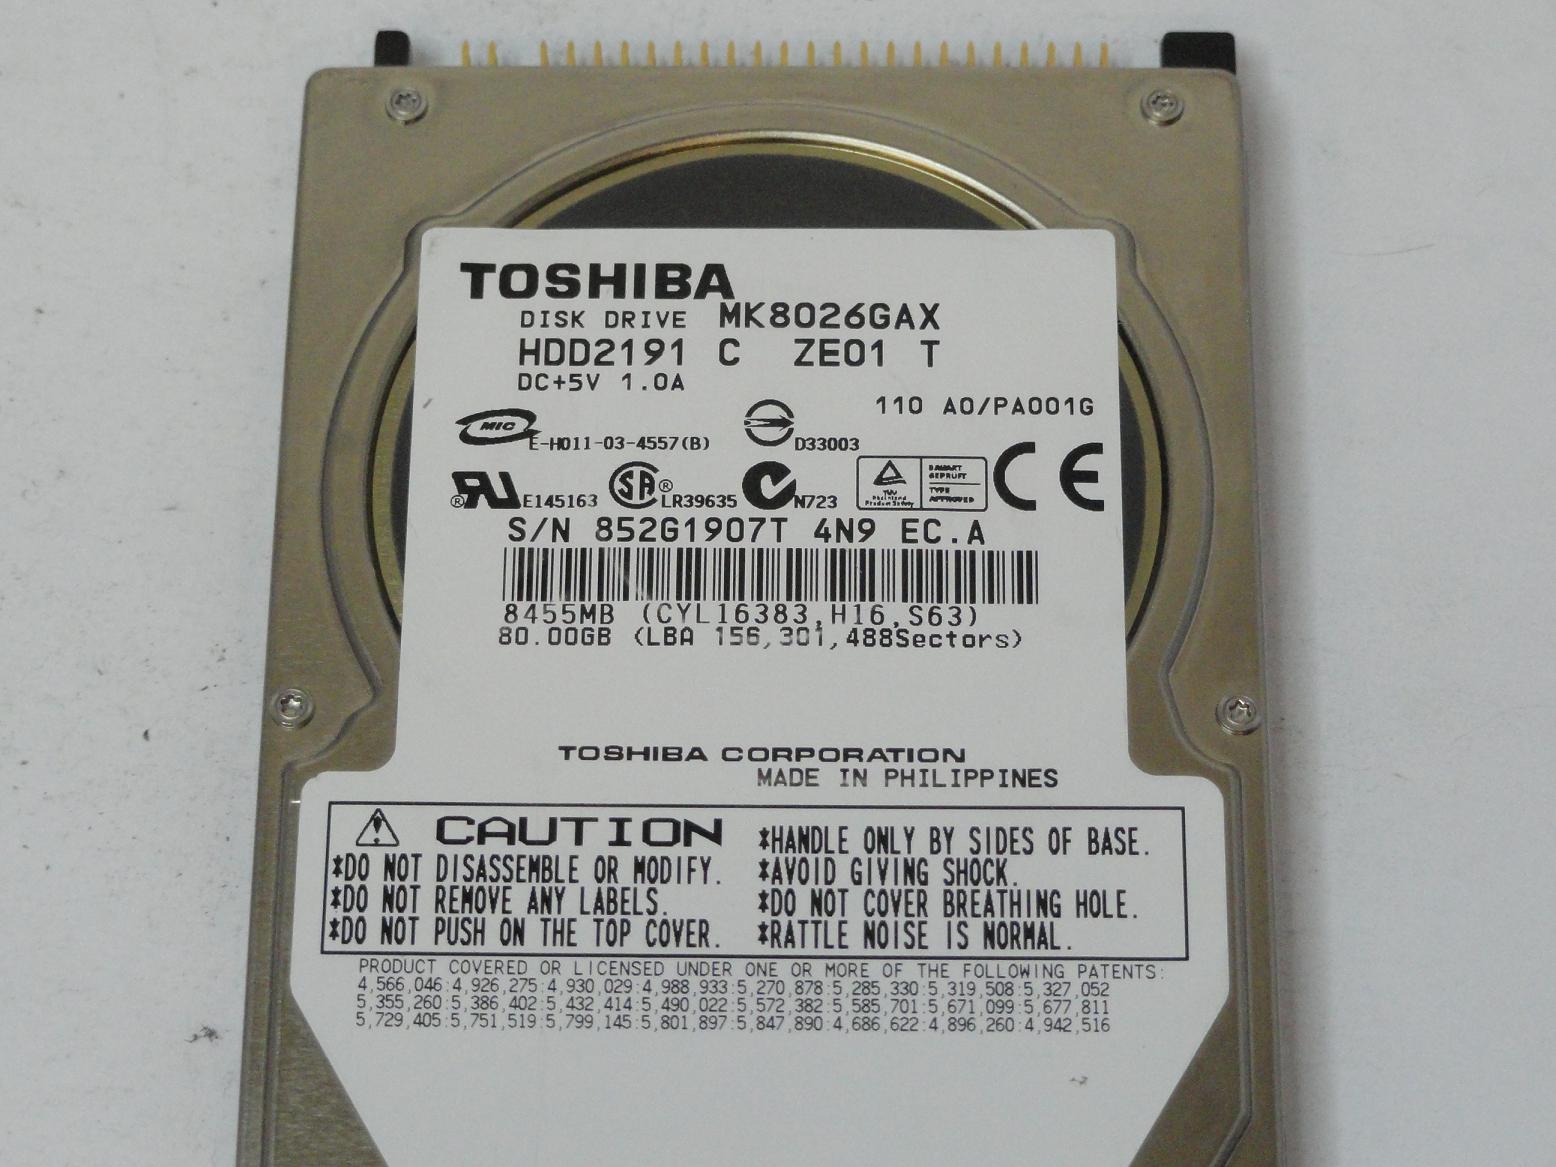 MC6420_HDD2191_Toshiba 80GB IDE 5400rpm 2.5in HDD - Image3